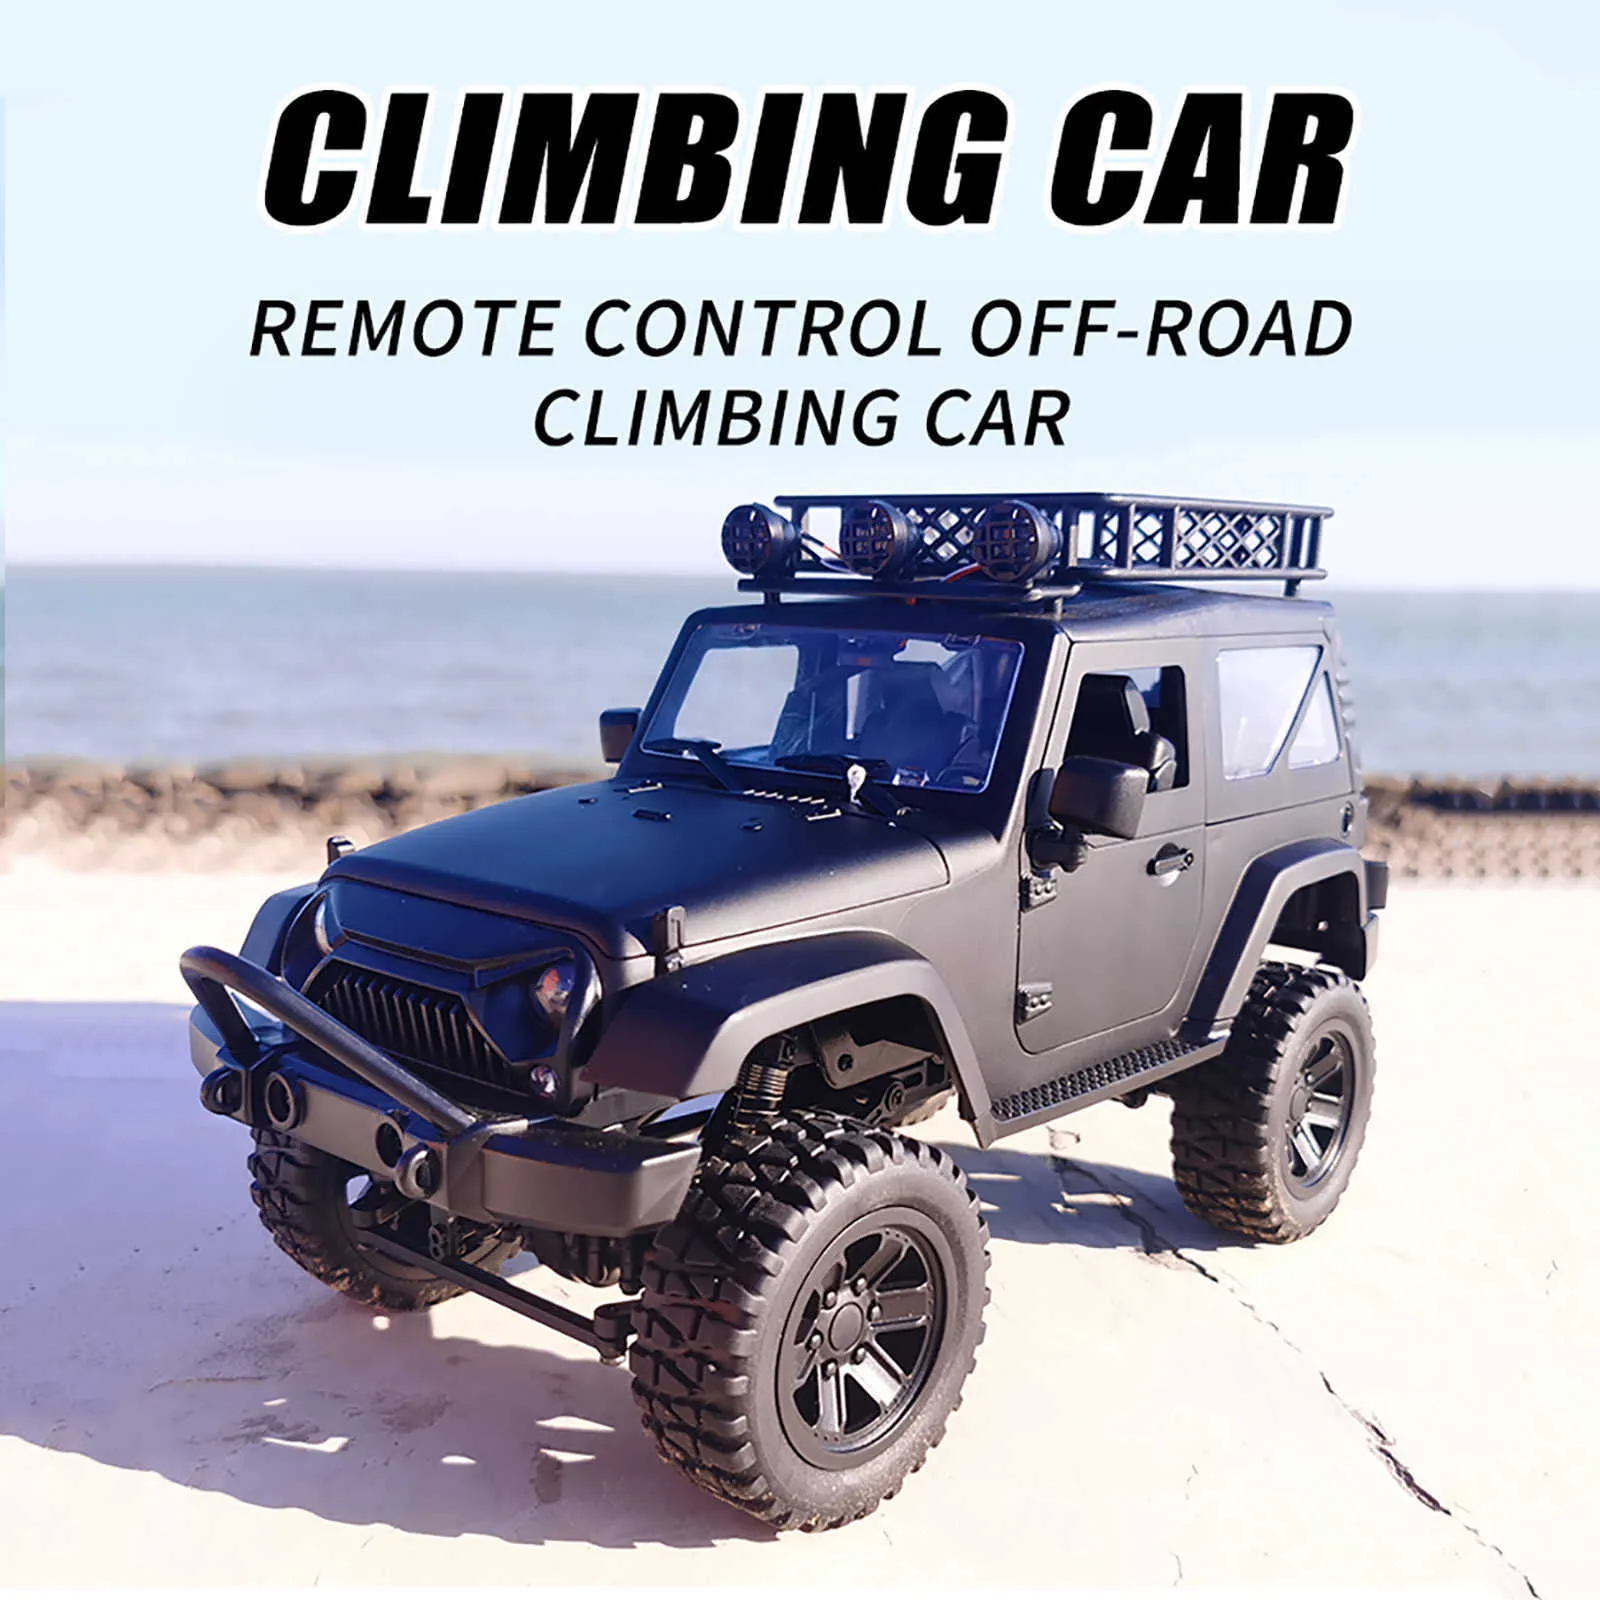 JY66 1:14 Endurance 90 Minute RC CAR con simulación ligera 4WD Escala completa 2.4G RC Off Road Vehicle Toy Model Cars Toys Gift Q0726